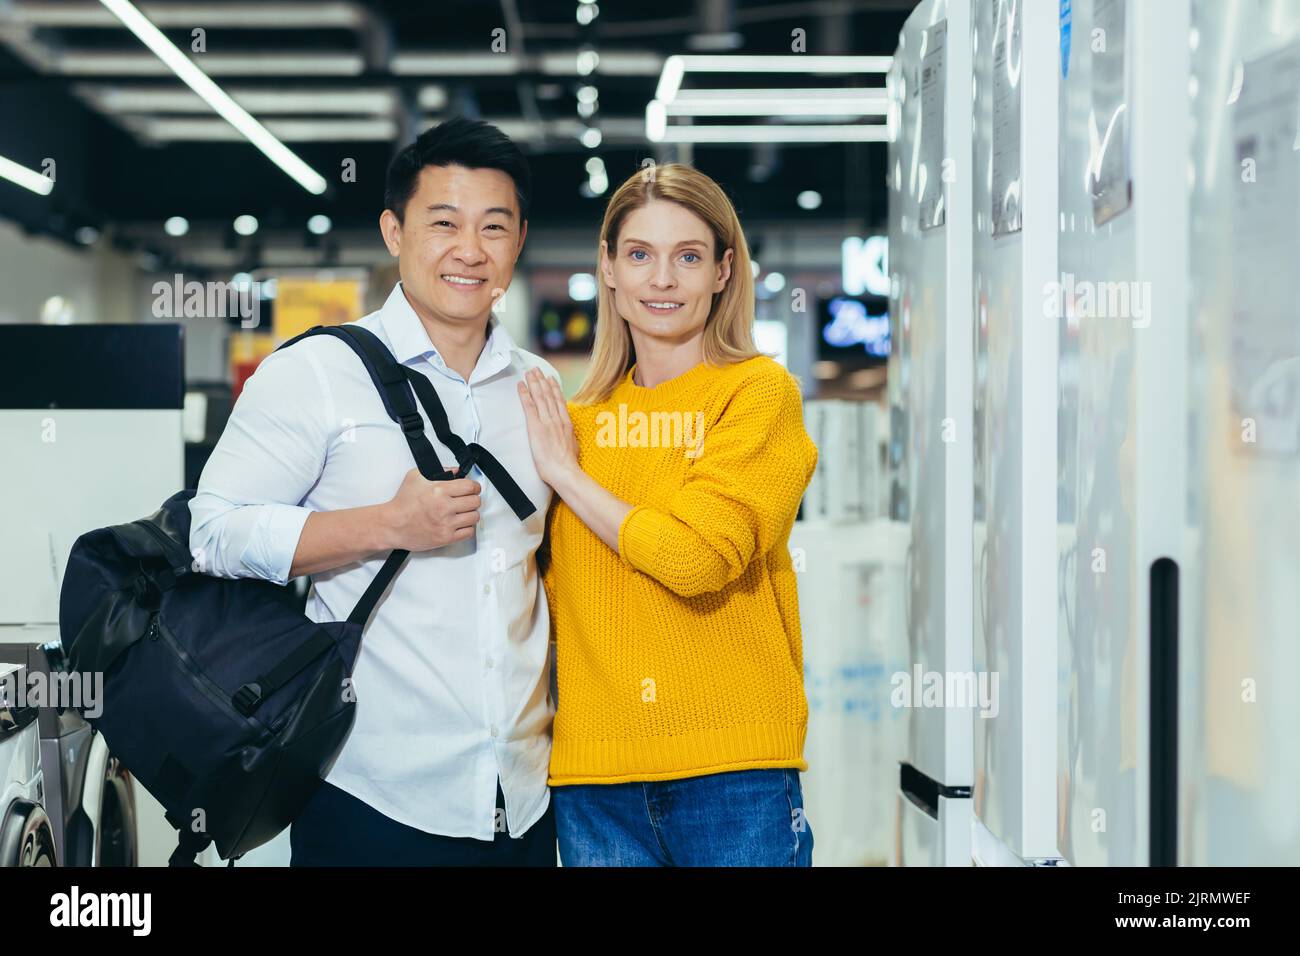 Portrait of a young married couple shopping in a home appliance supermarket, a diverse family of a man and a woman smiling and looking at the camera, choosing and buying home appliances Stock Photo